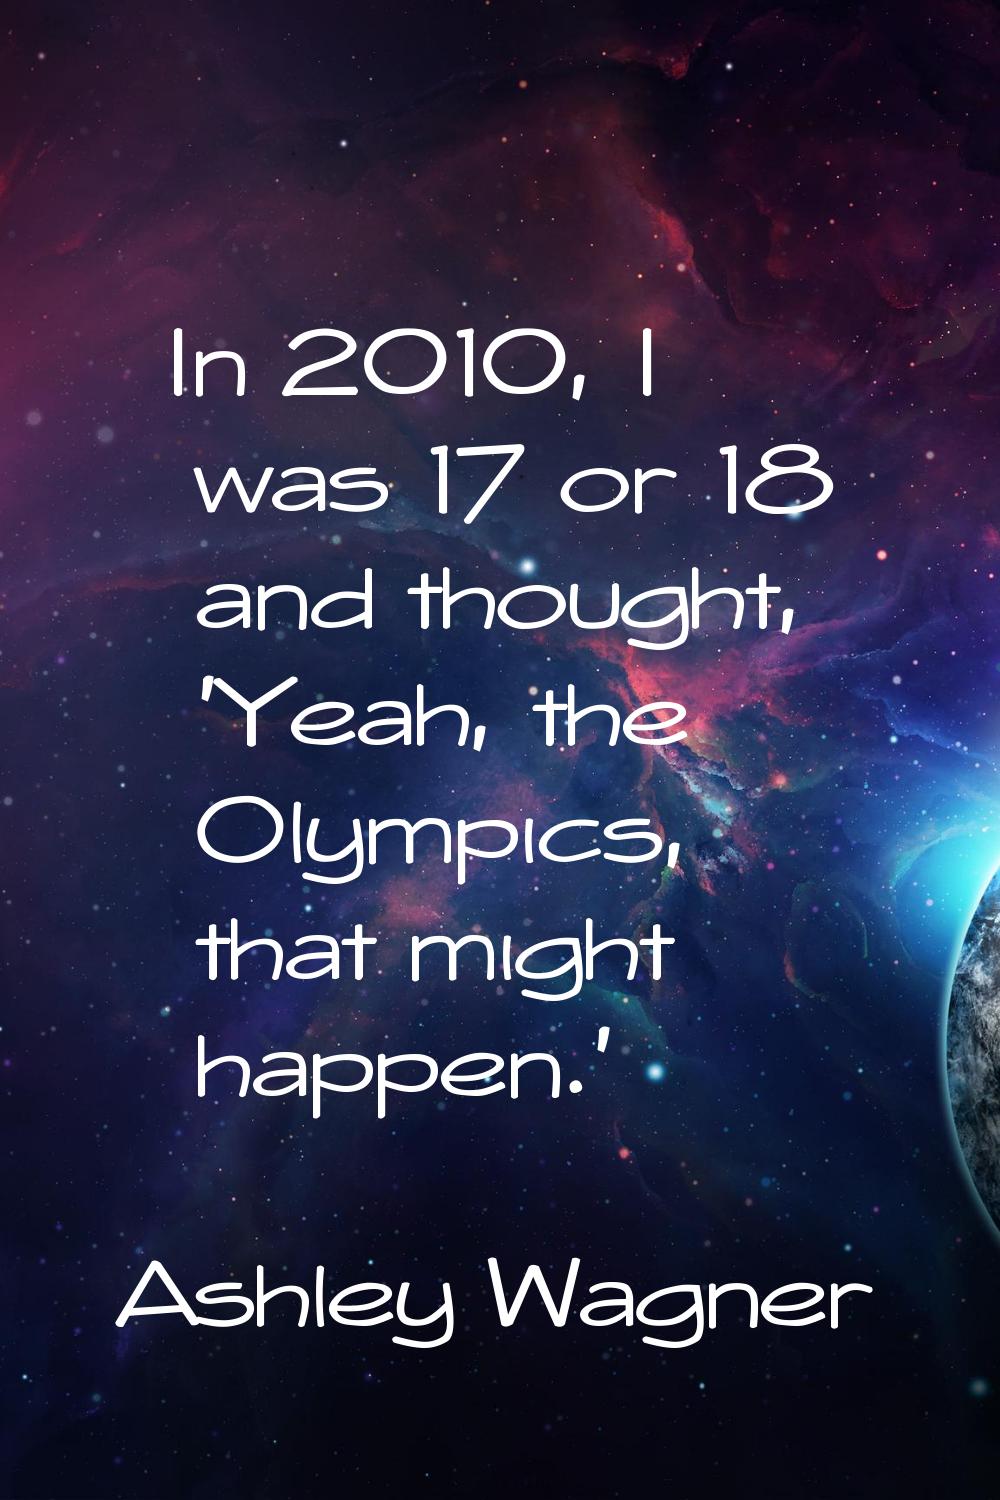 In 2010, I was 17 or 18 and thought, 'Yeah, the Olympics, that might happen.'